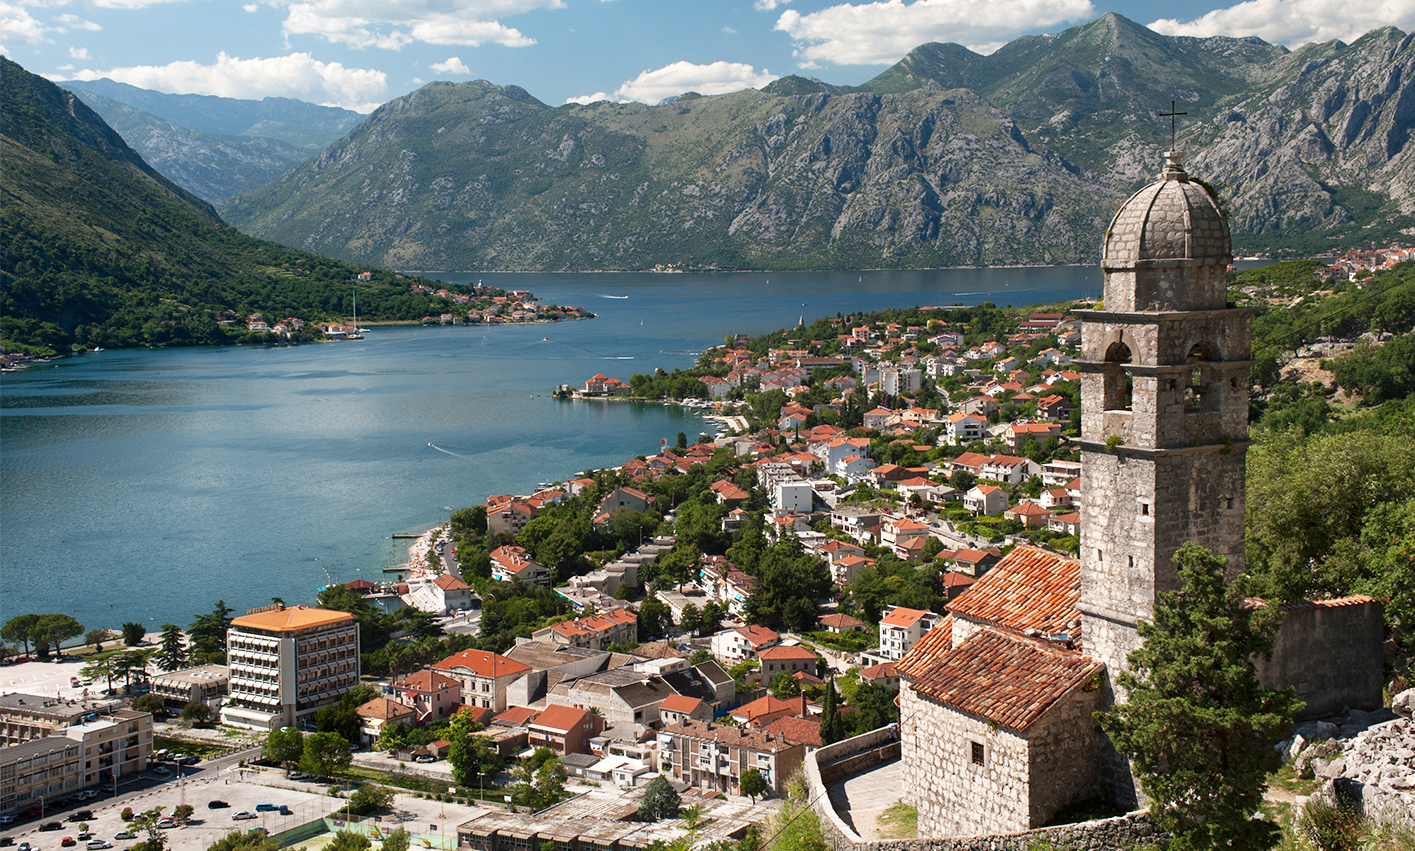 View of Our Lady of Health church and Kotor Bay in Kotor, Montenegro.